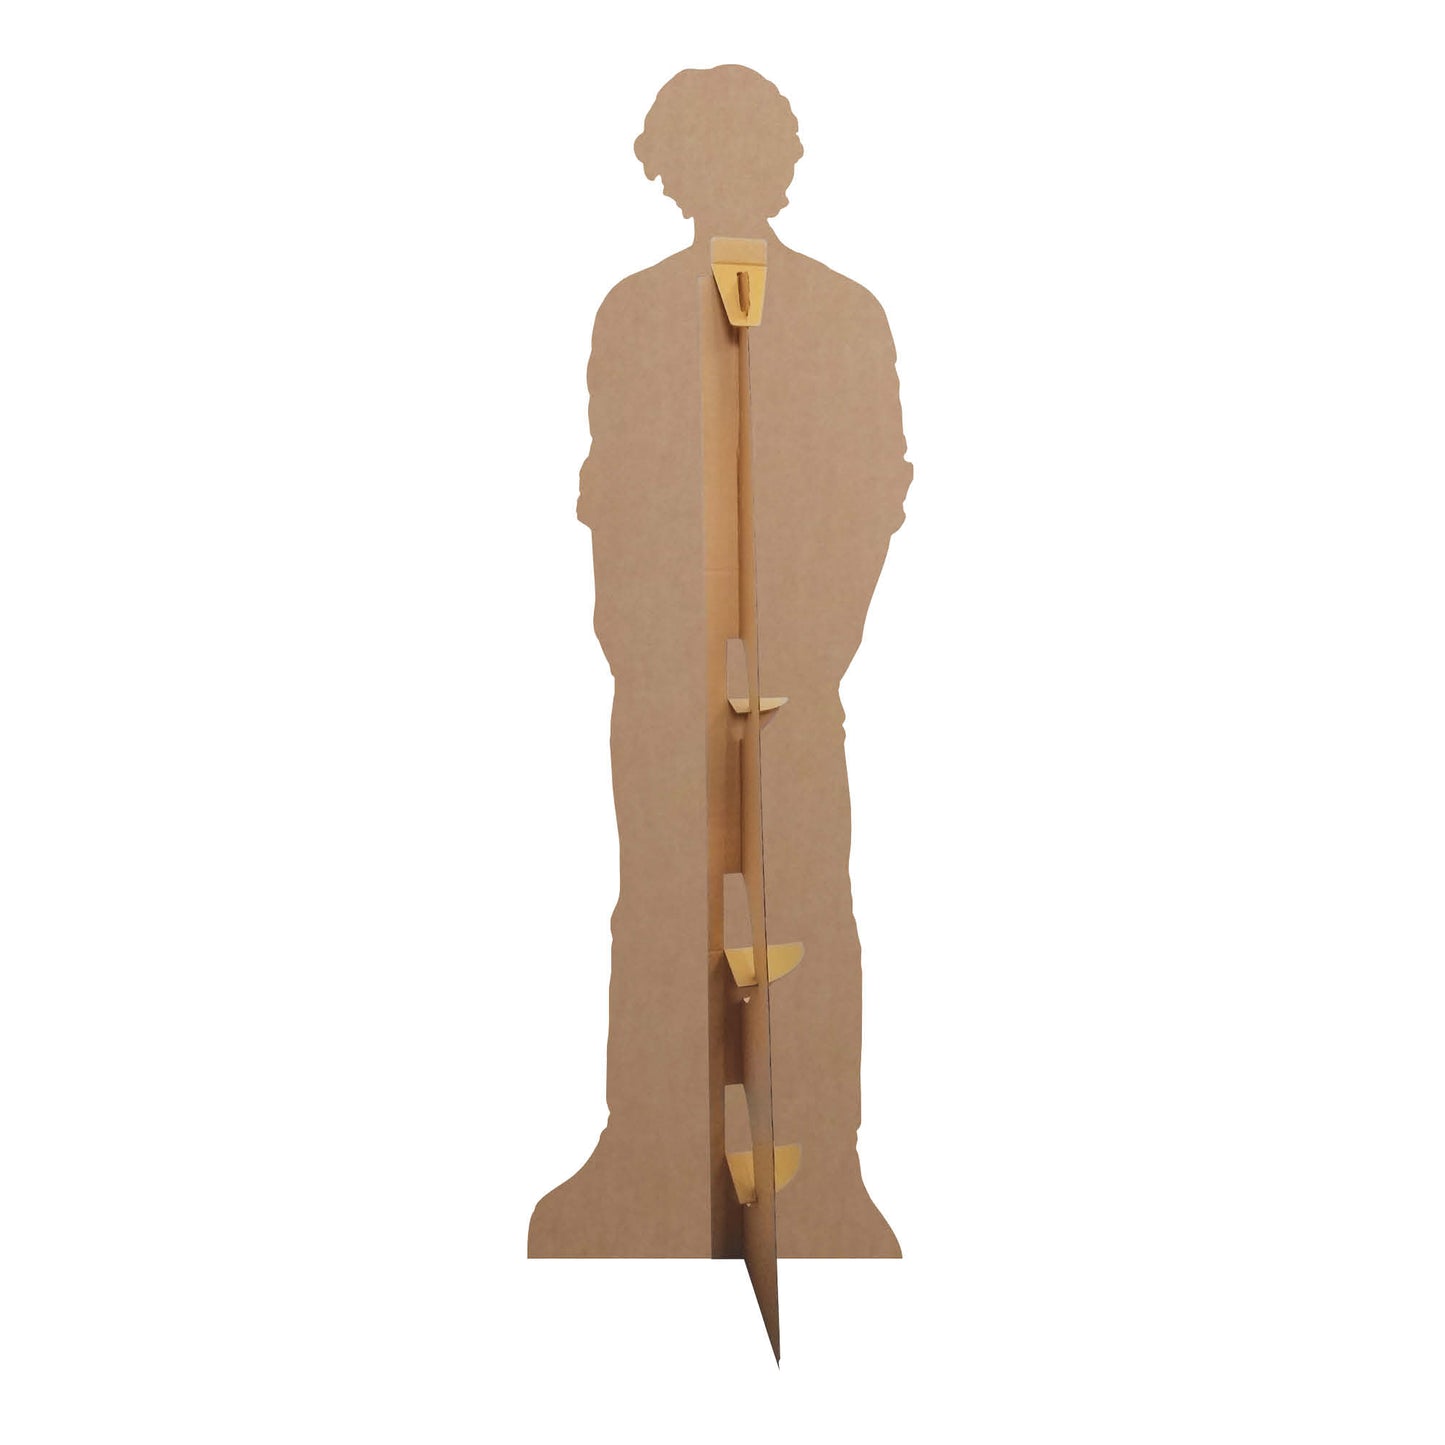 CS827 Timothee Hal Chalamet American Actor Height 179cm Lifesize Cardboard Cut Out With Mini